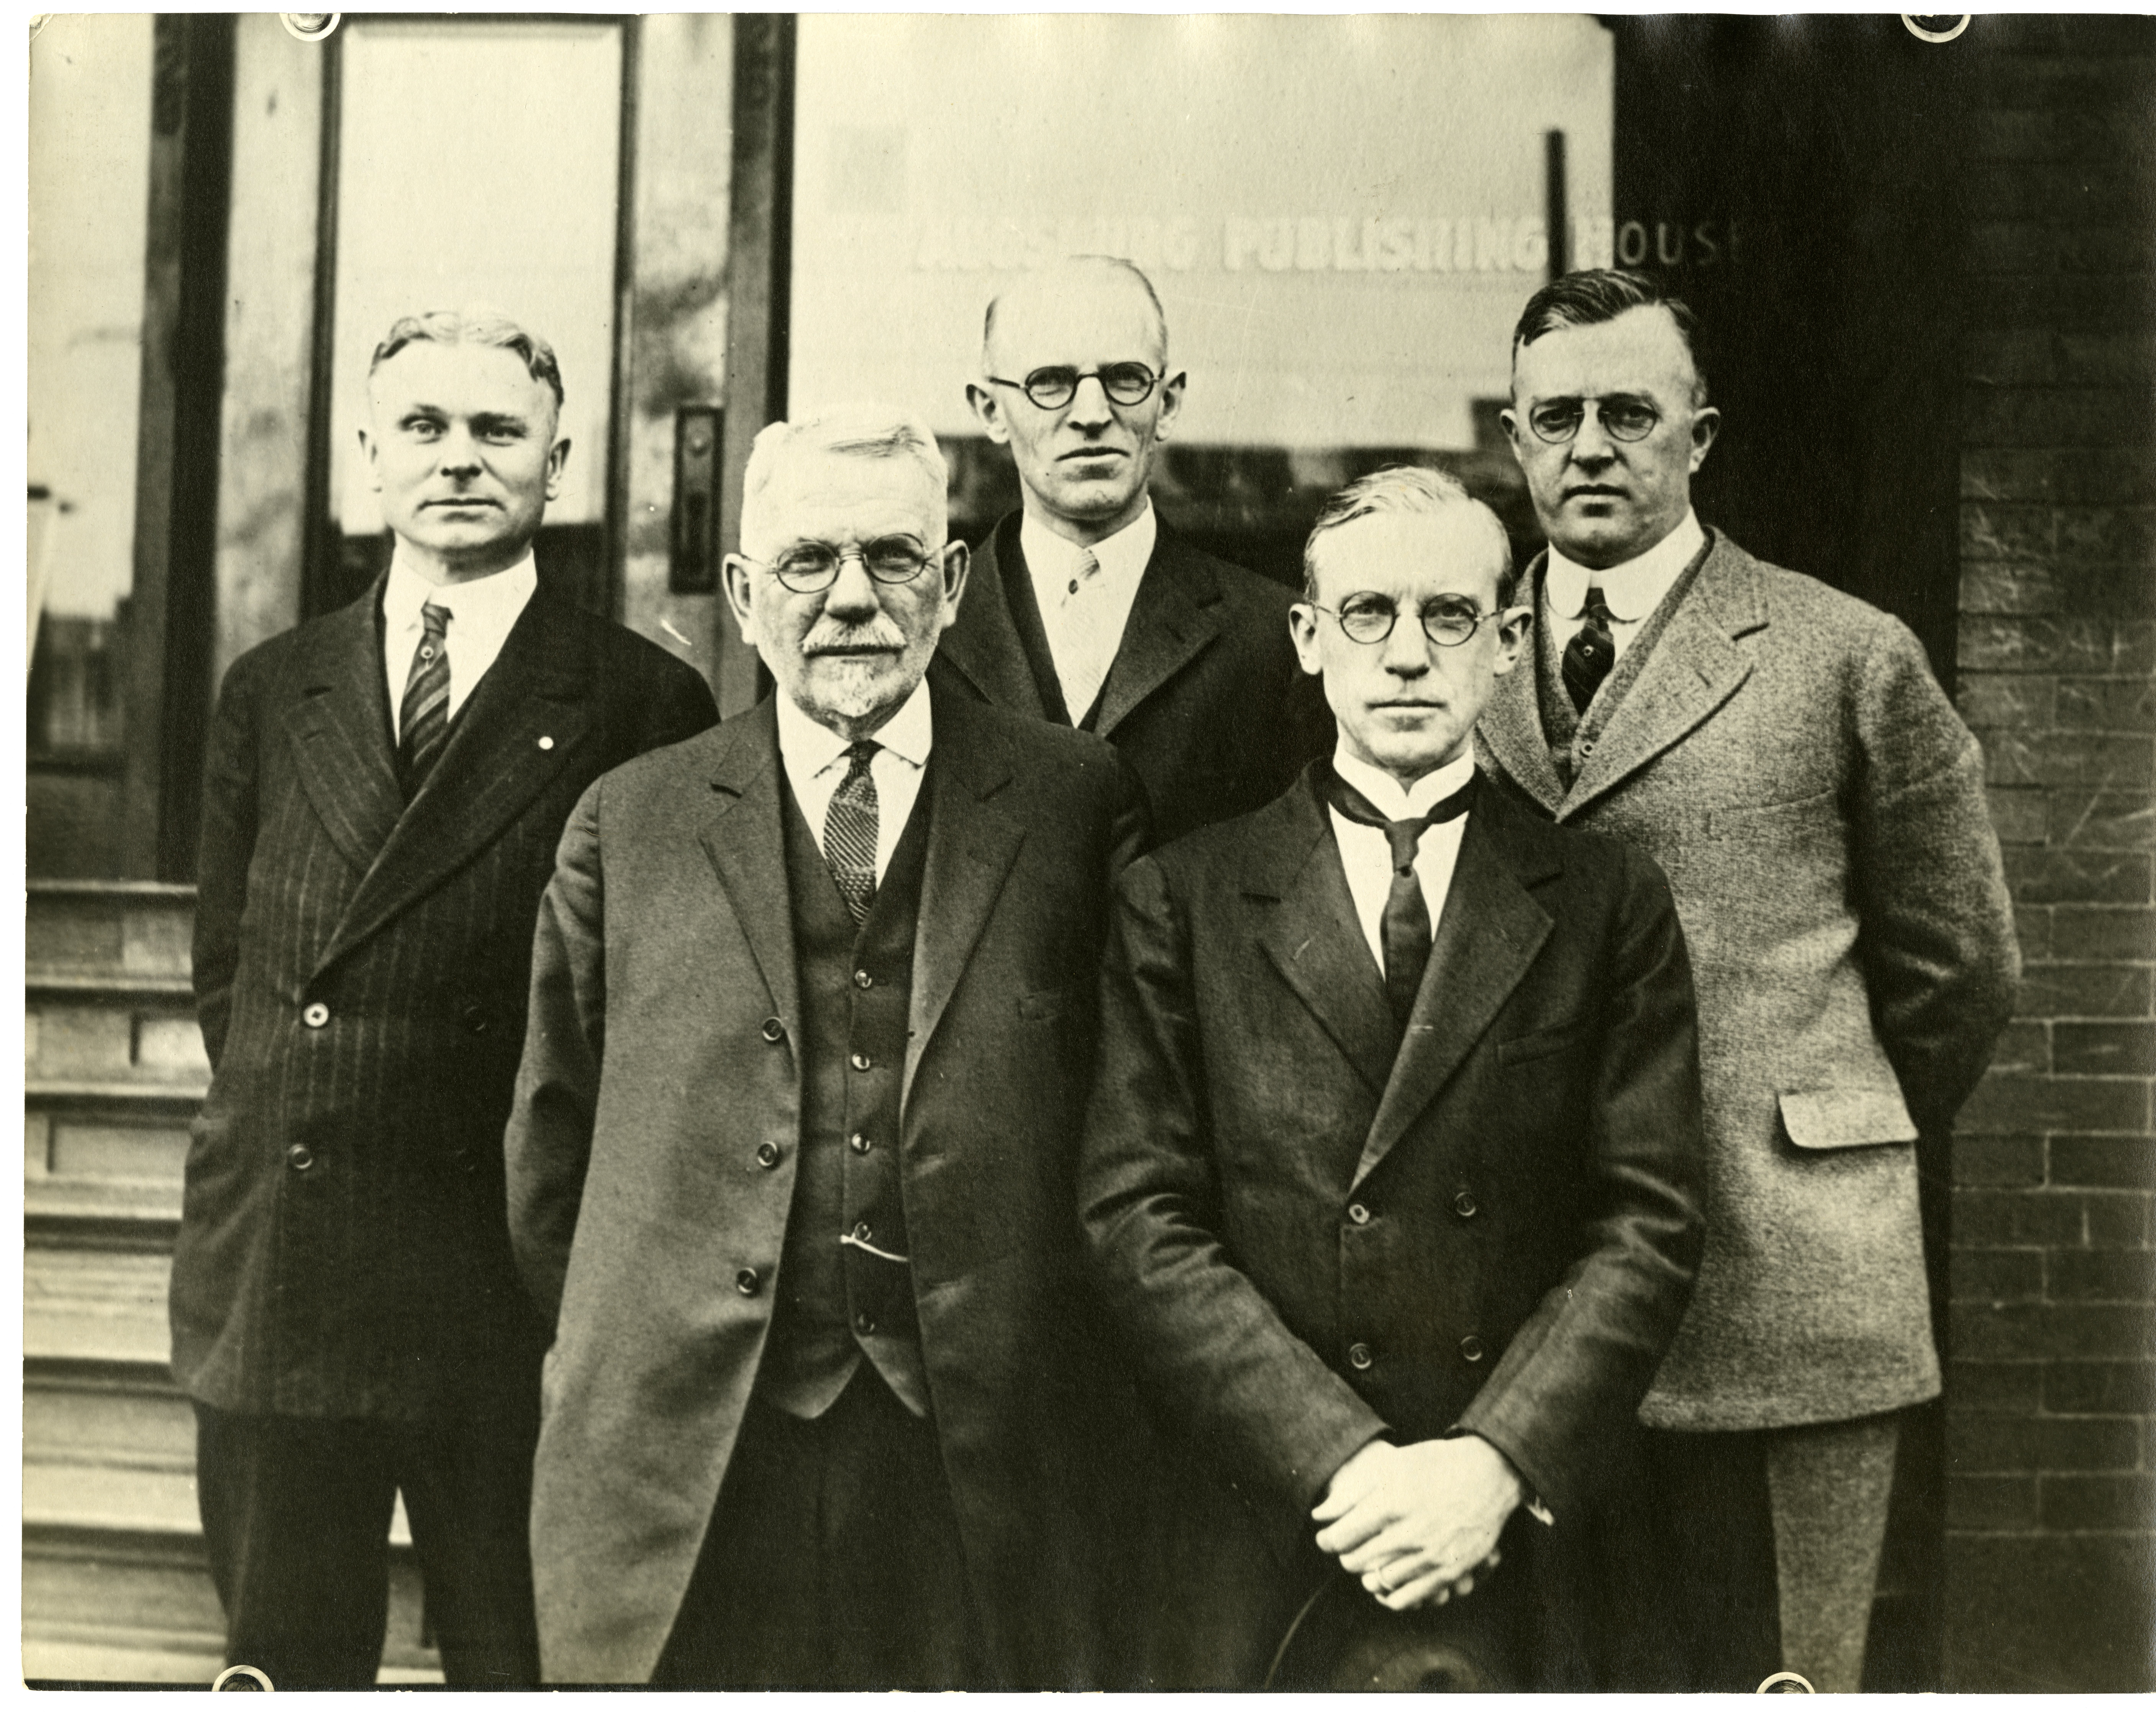 Five men pose for a photo outside of publishing house.